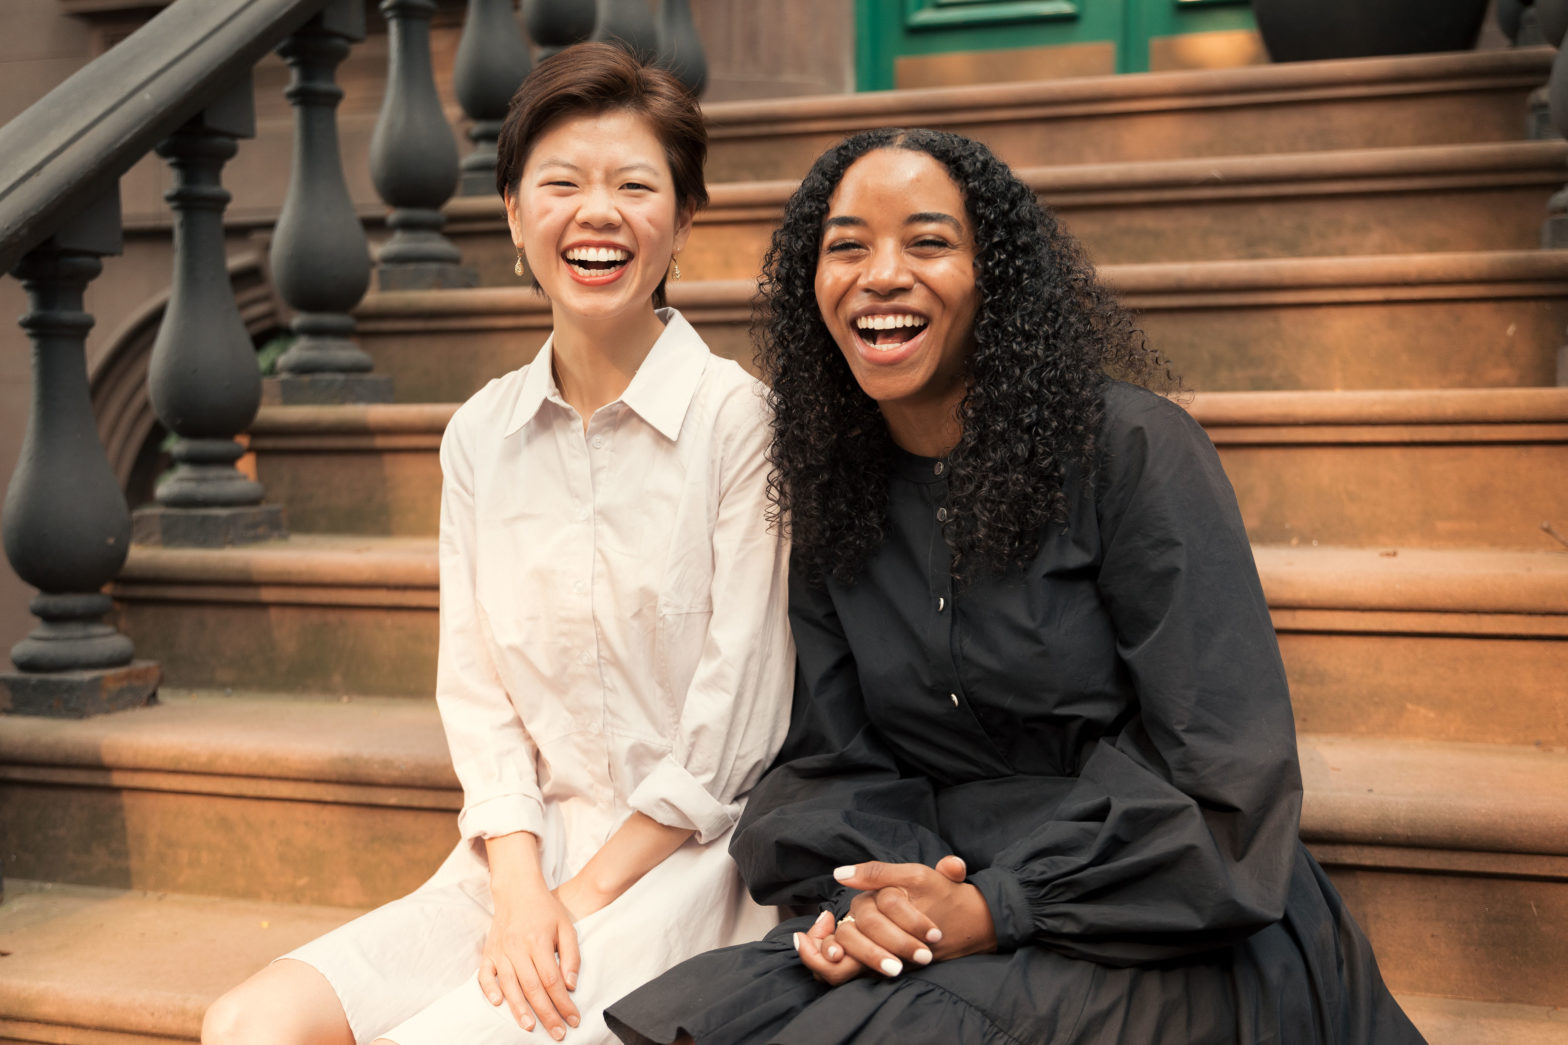 Elise Smith And Heather Shen's Praxis Labs Raises $15.5M In Oversubscribed Series A Round